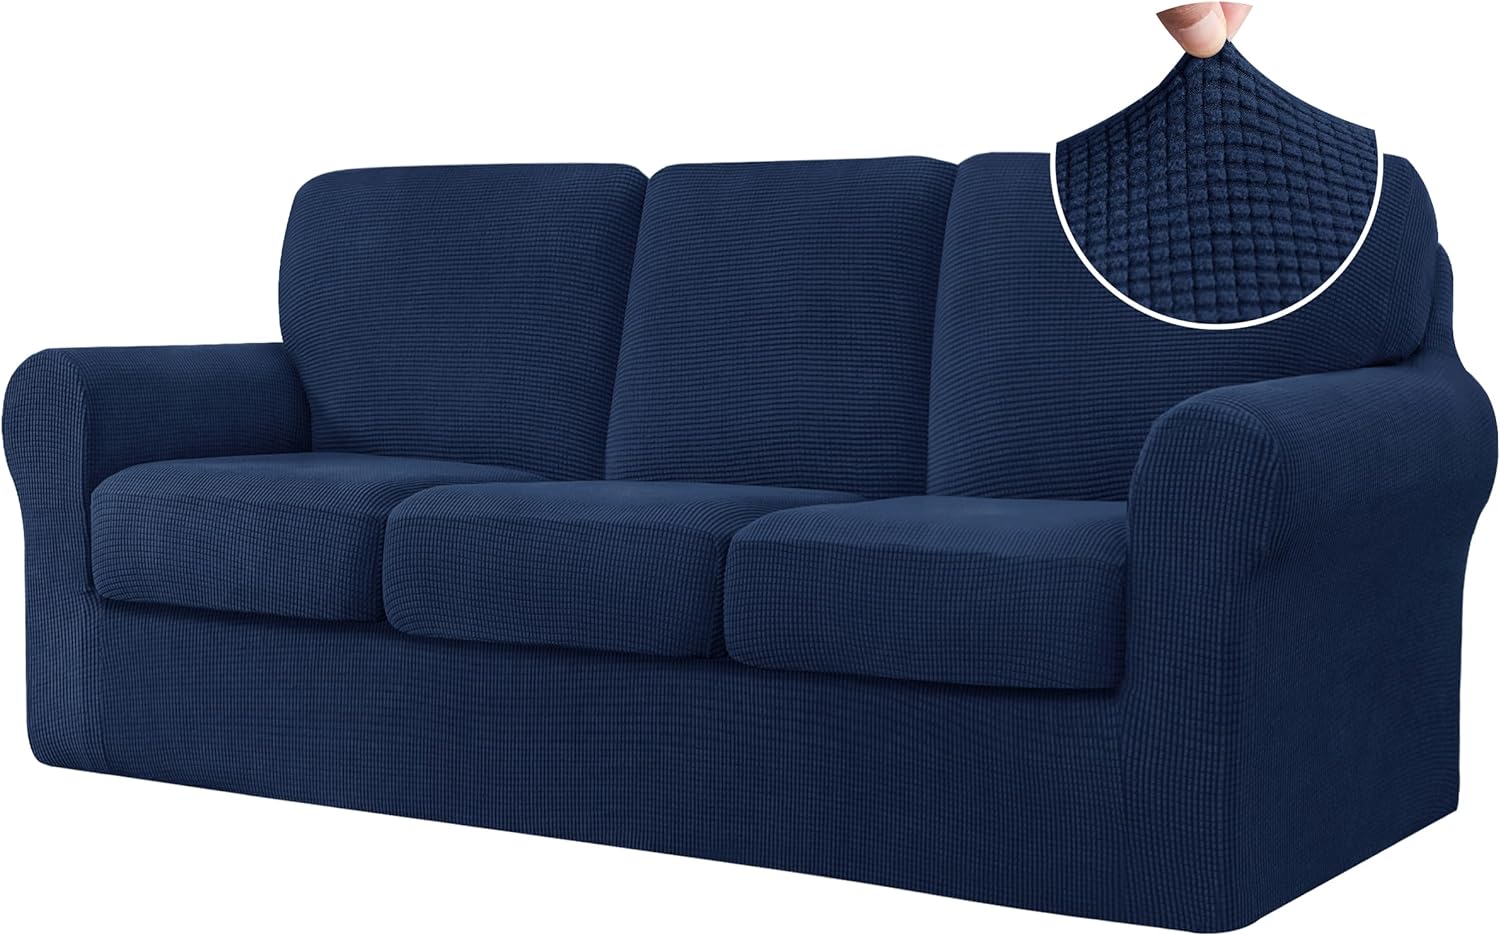 CHUN YI 7 Piece Stretch Sofa Covers for 3 Cushion Couch Covers, 3 Seater Couch Slipcover with 3 Separate Backrests and Cushions with Elastic Band, Checks Spandex Jacquard Fabric(Large, Dark Blue)